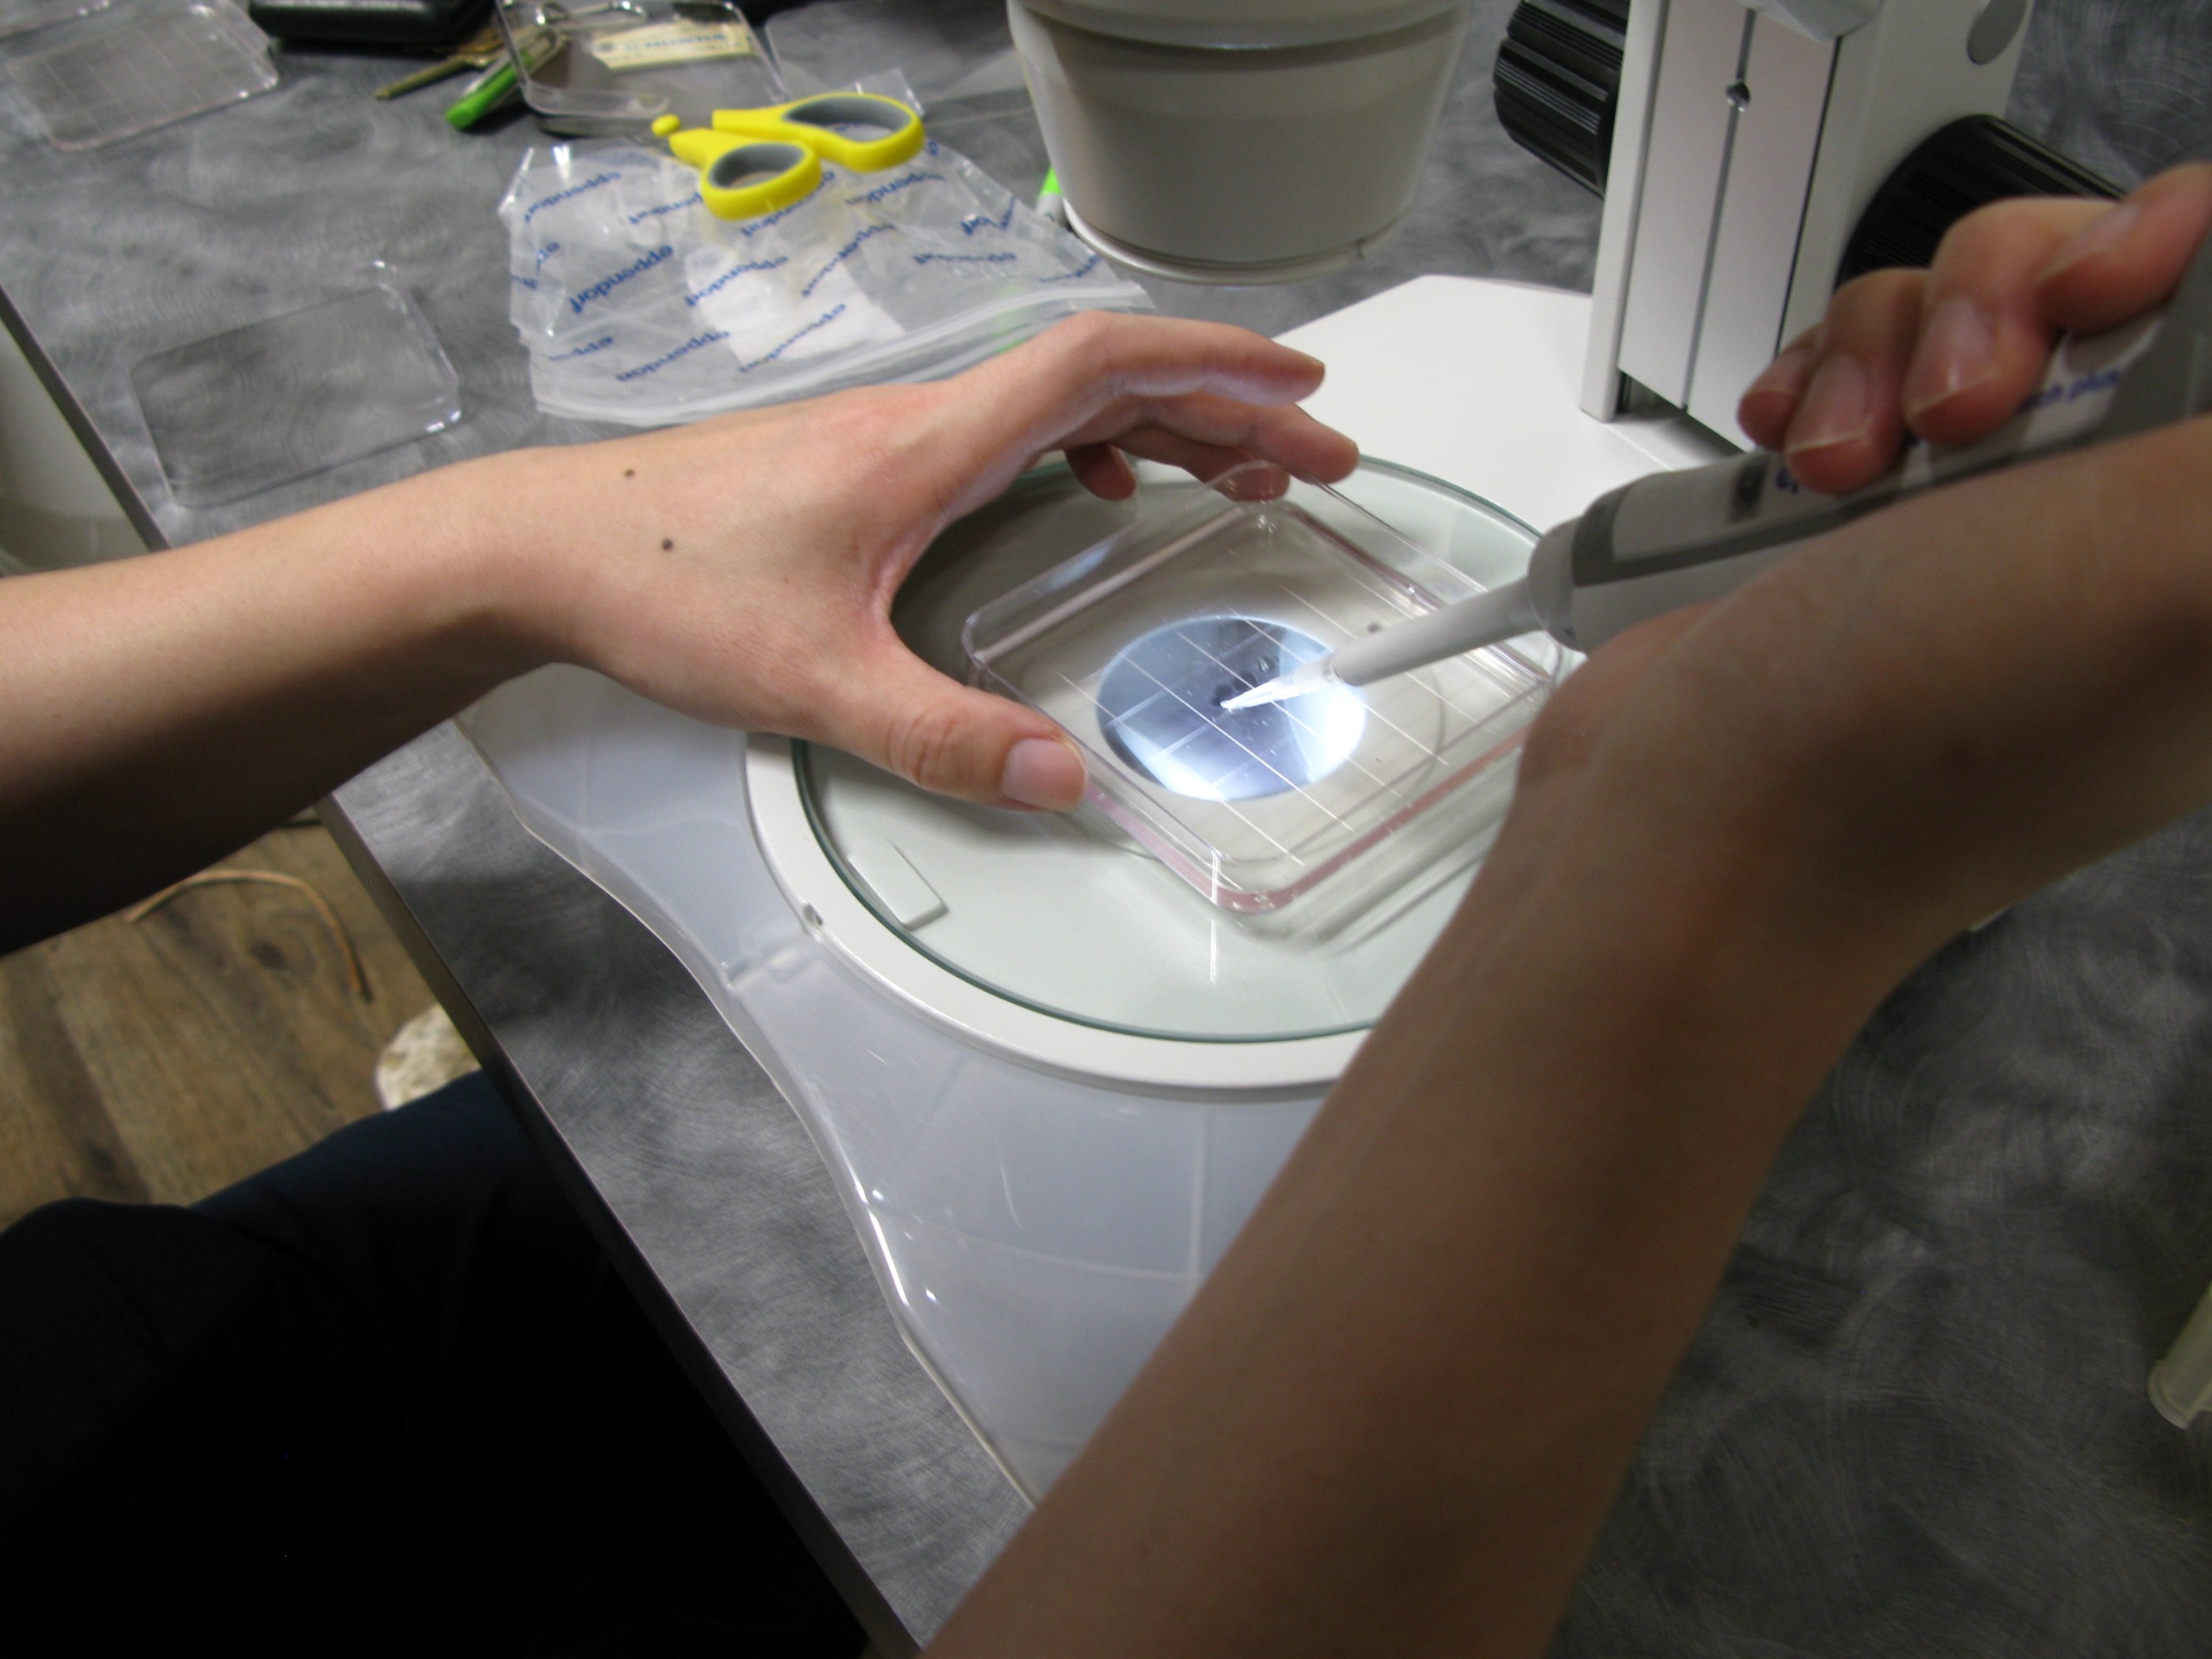 hands adding a sample to a plate with a stripetter